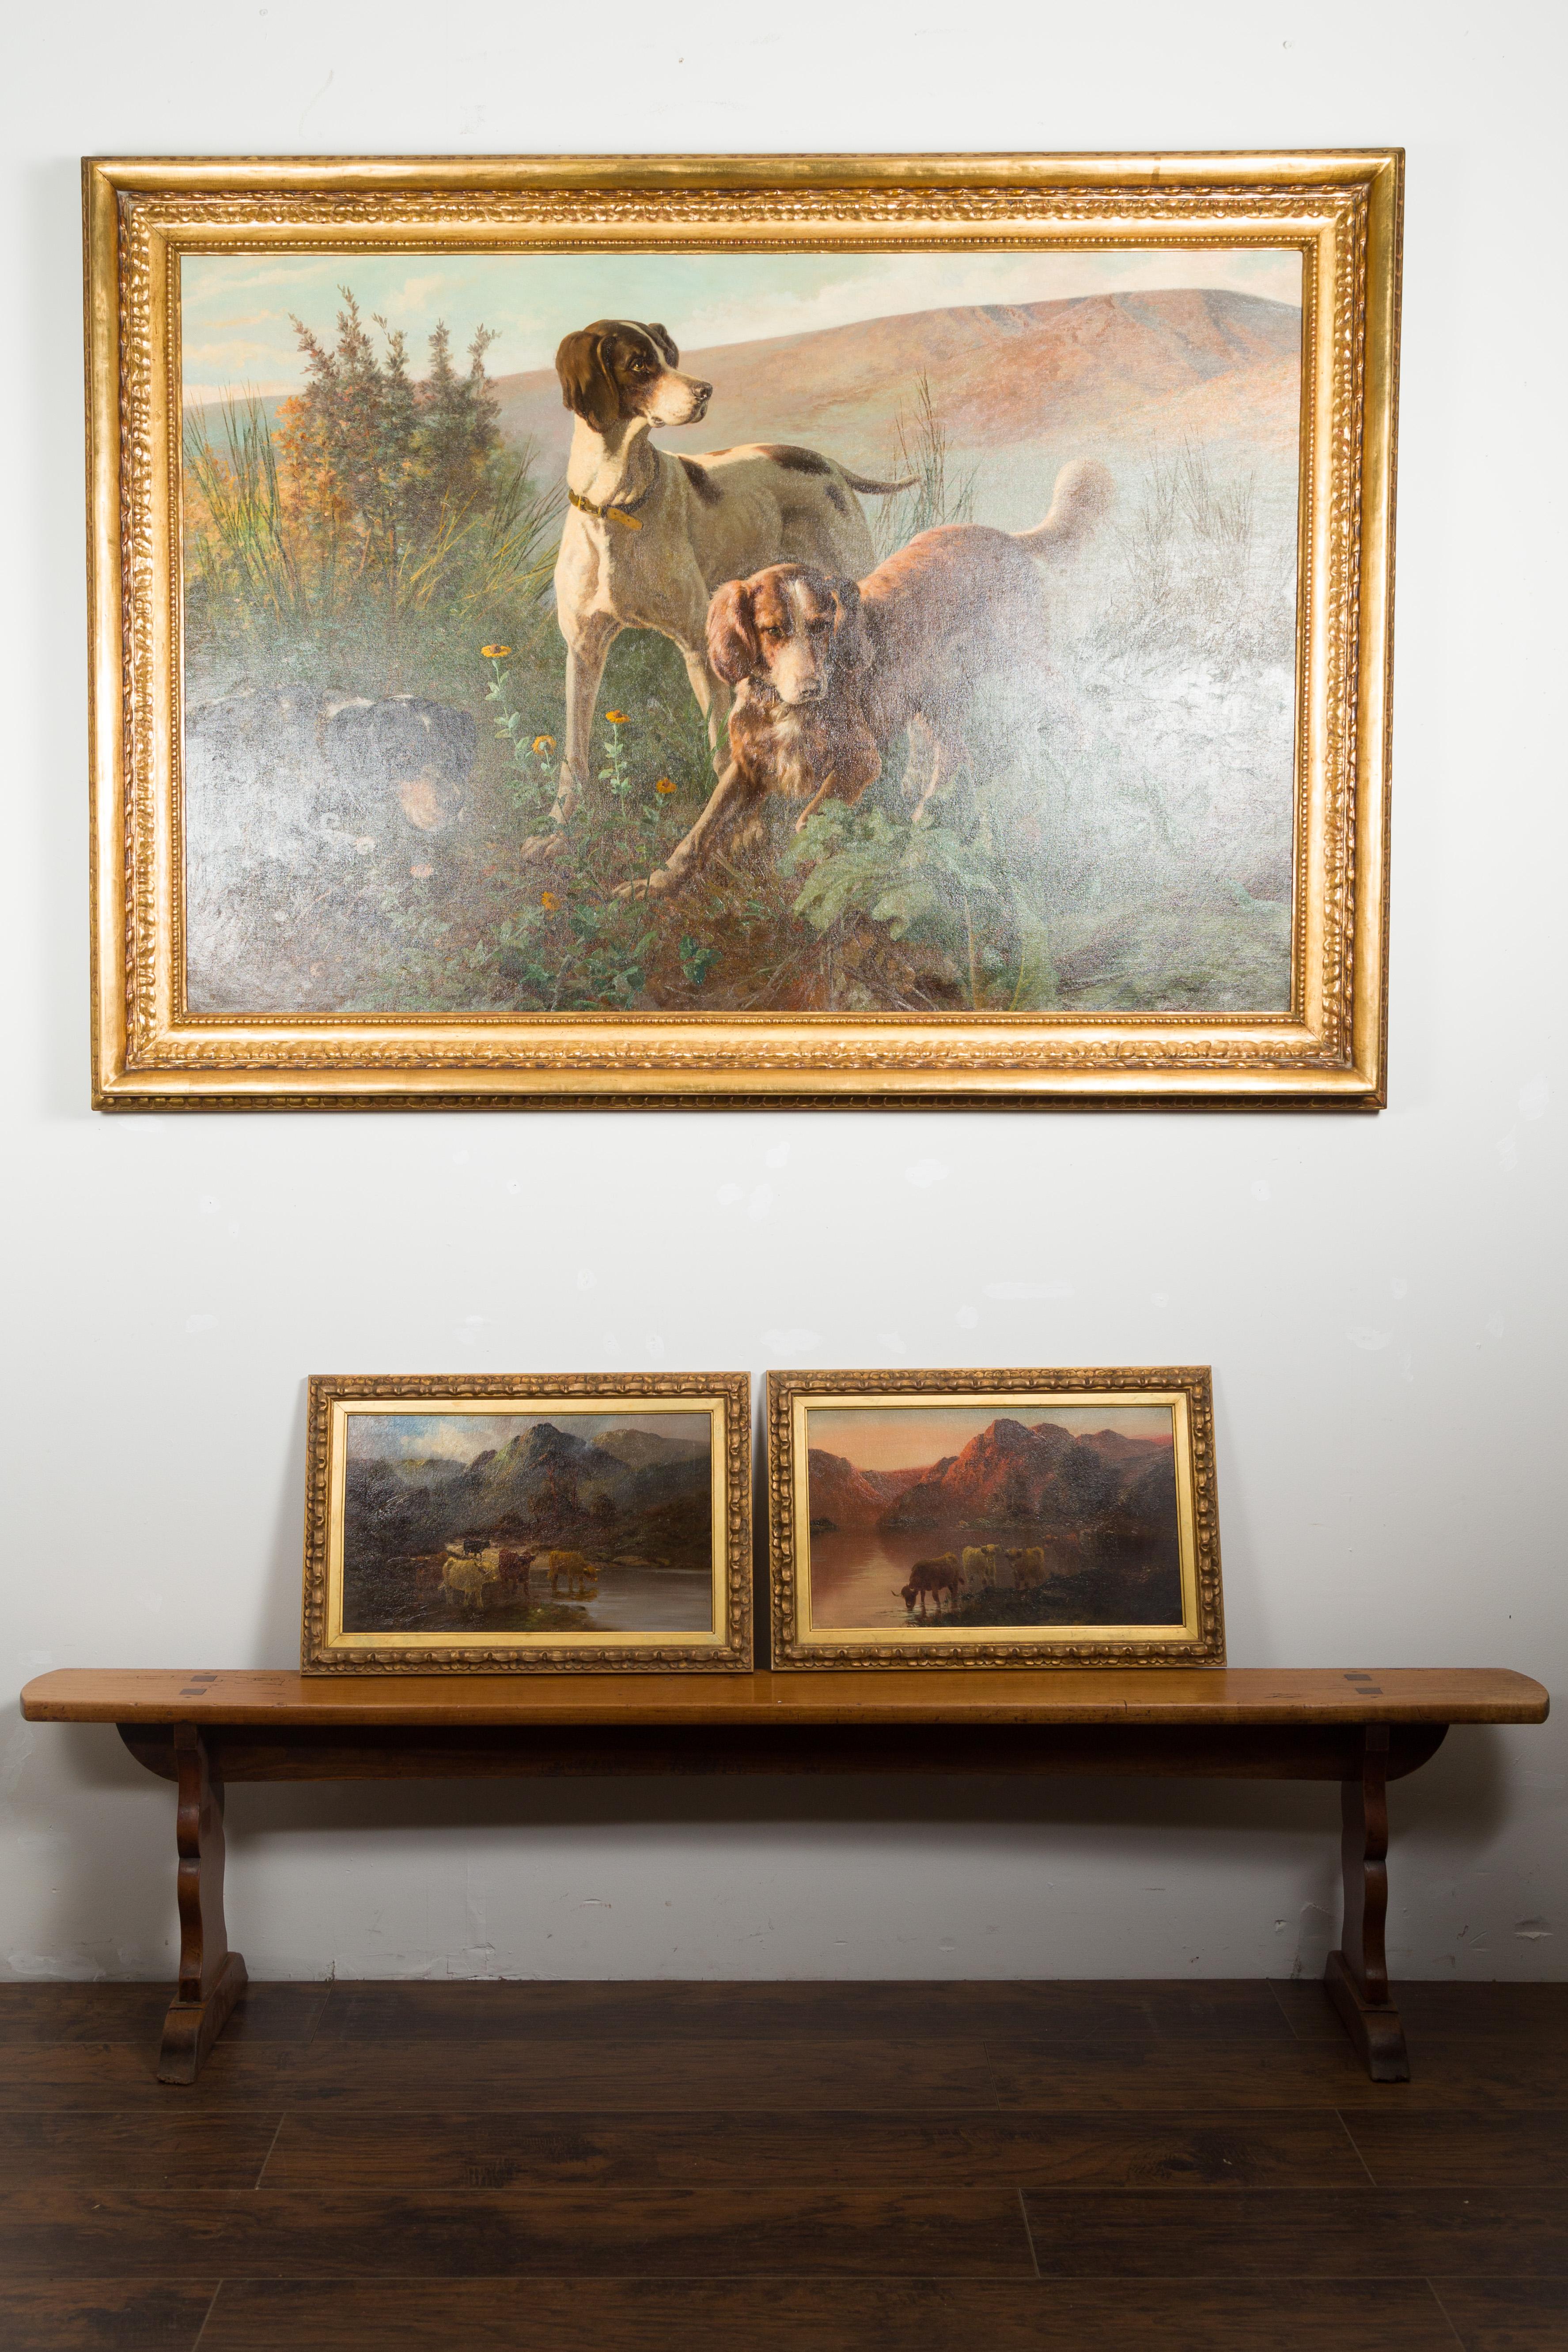 A pair of English oil on canvas paintings by Francis E. Jamieson (1895 - 1950) depicting Scottish Highland cows. Created in England during the first half of the 20th century, each of this pair of oil on canvas paintings depicts a herd of cows